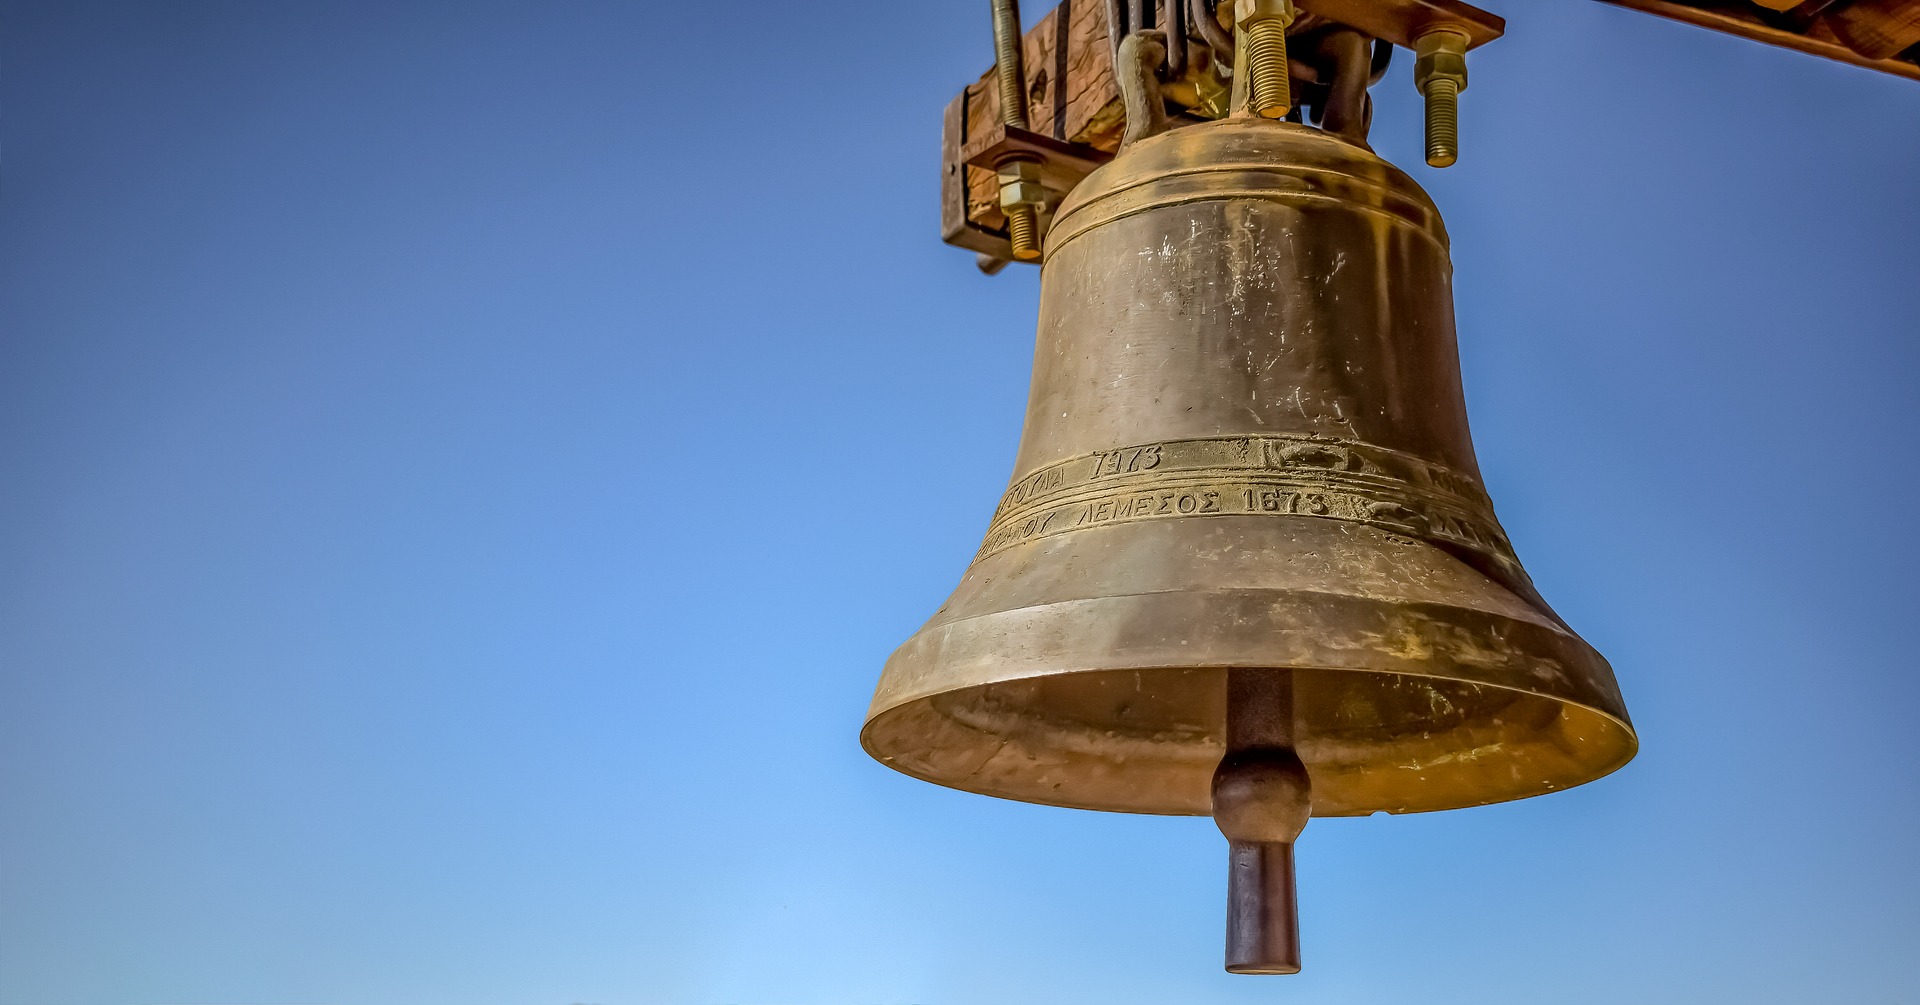 picture of large bronze bell against blue sky with Greek lettering